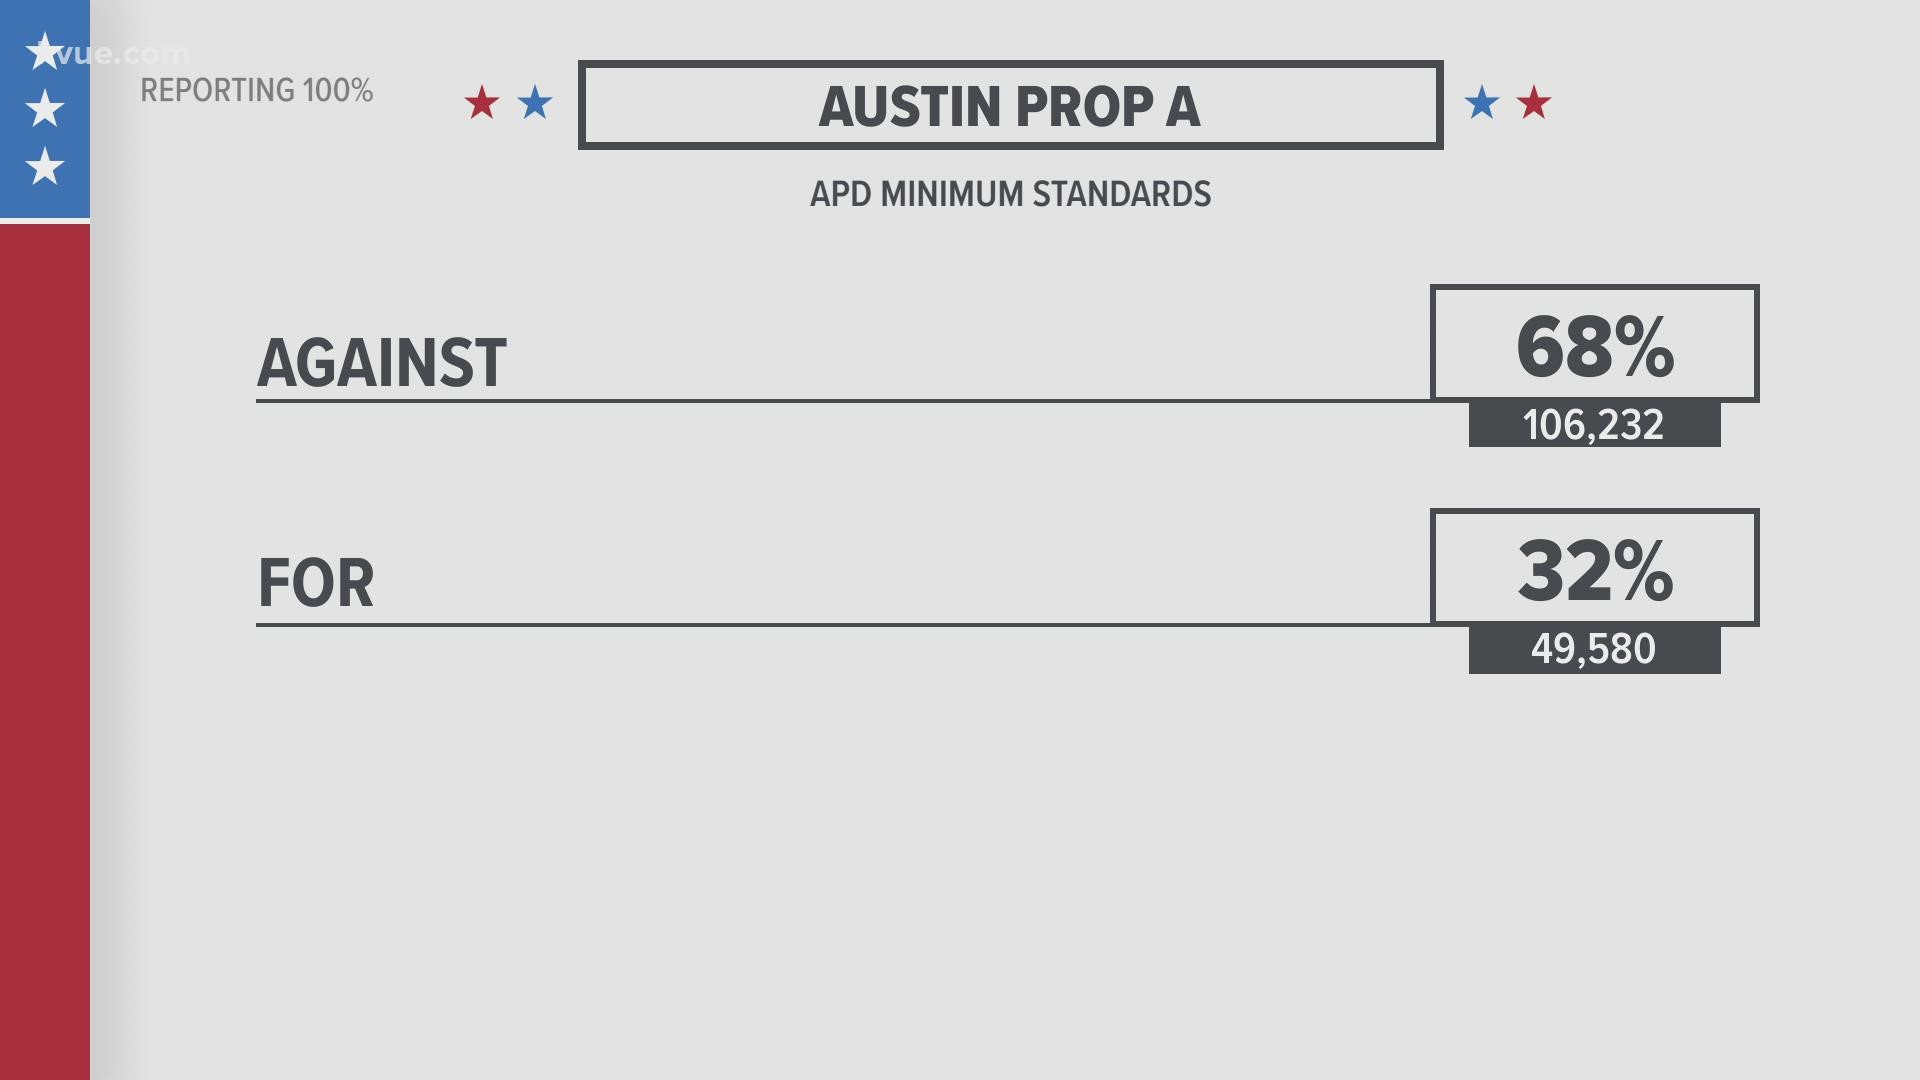 Austin's Proposition A failed to pass. The prop would have required two police officers for every 1,000 residents in Austin.